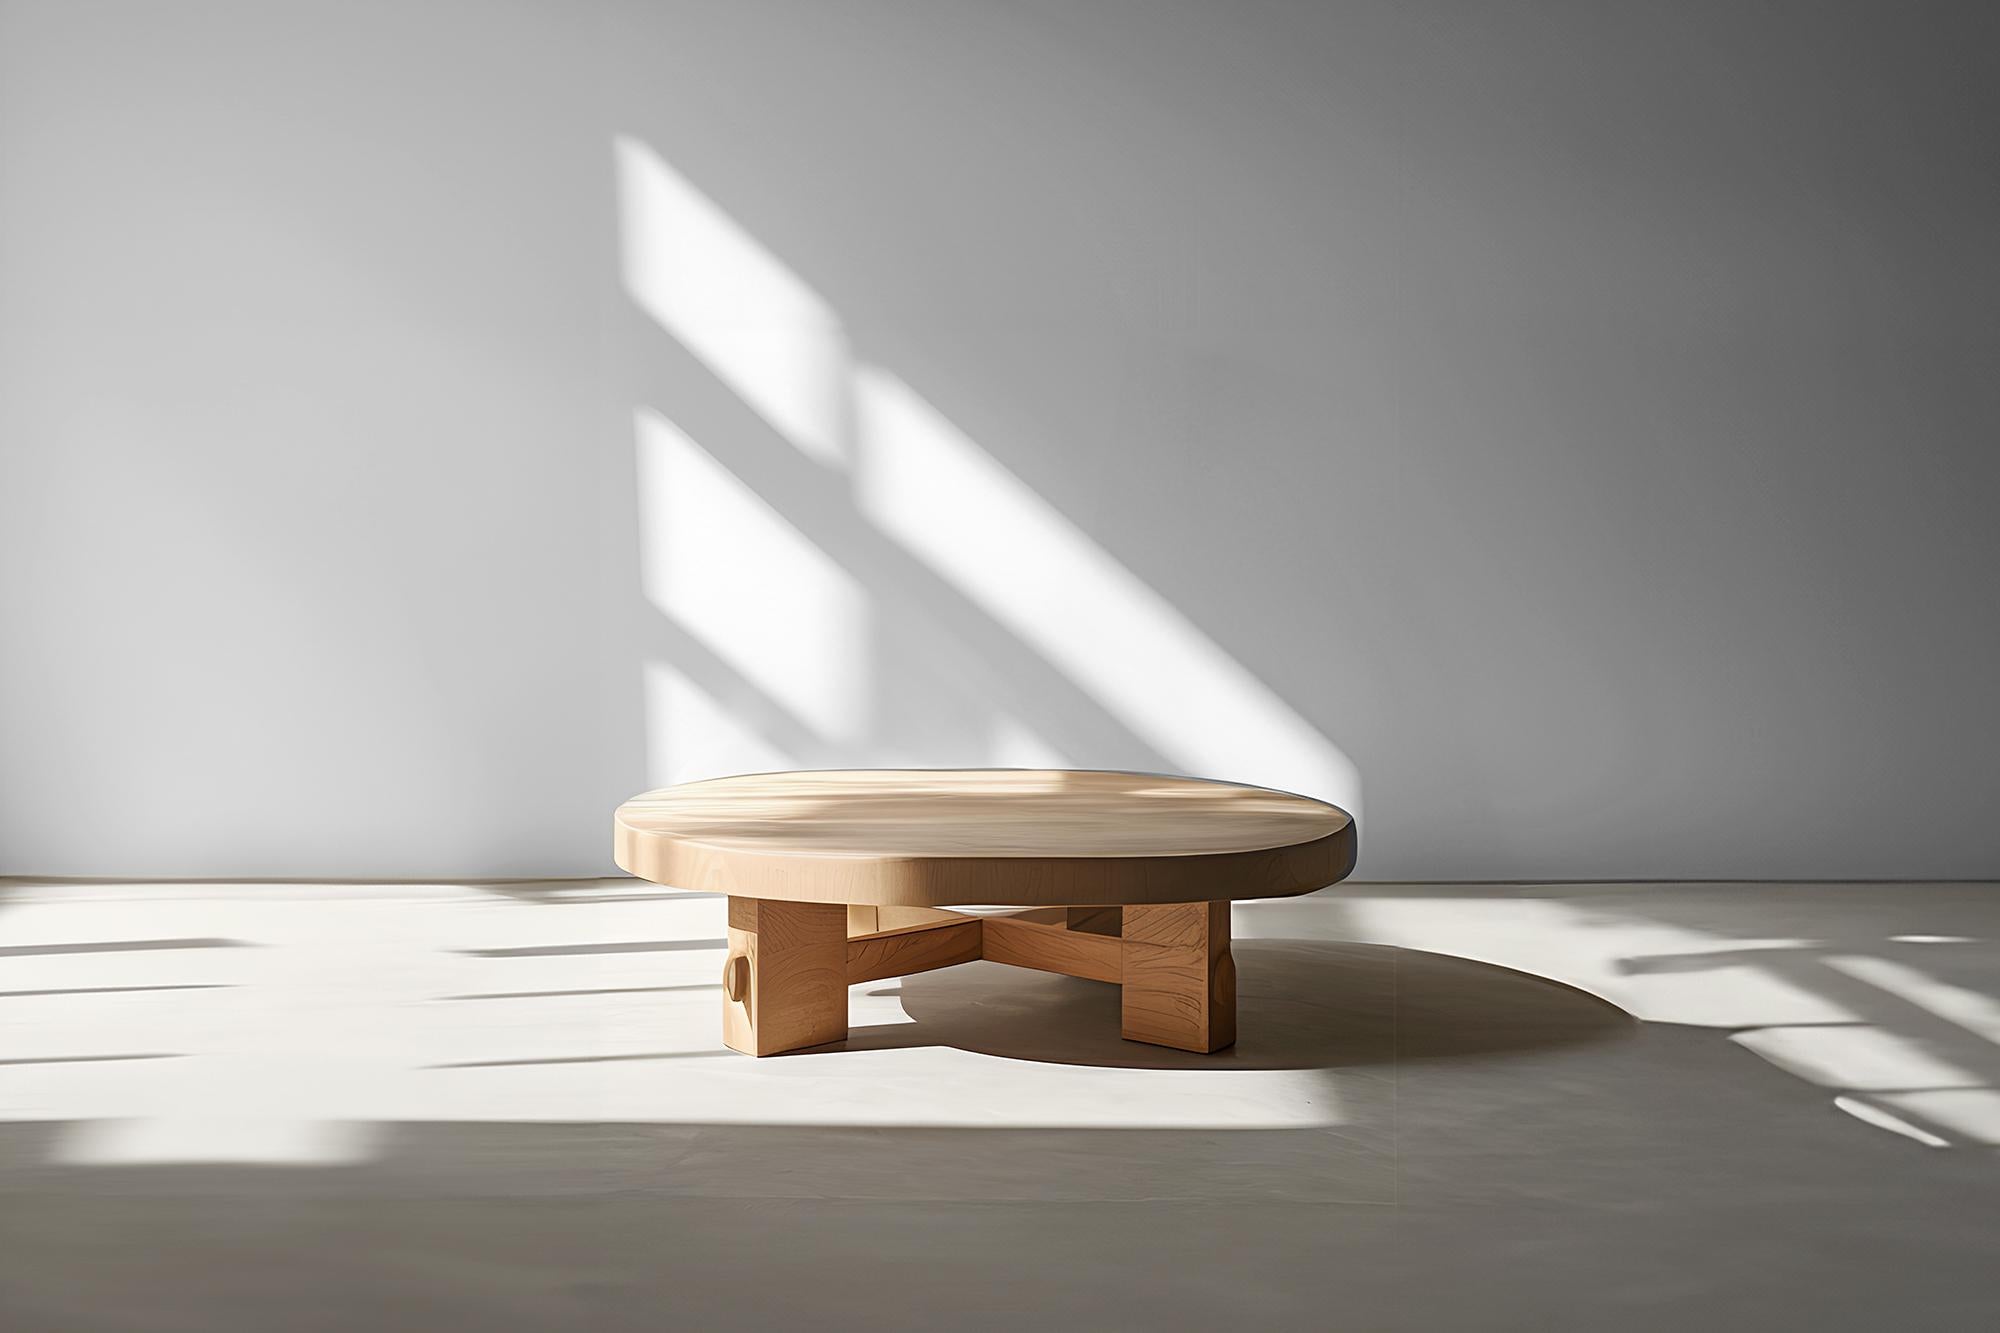 Cuatri-Leg Round Coffee Table - Harmonic Fundamenta 37 by NONO


Sculptural coffee table made of solid wood with a natural water-based or black tinted finish. Due to the nature of the production process, each piece may vary in grain, texture, shape